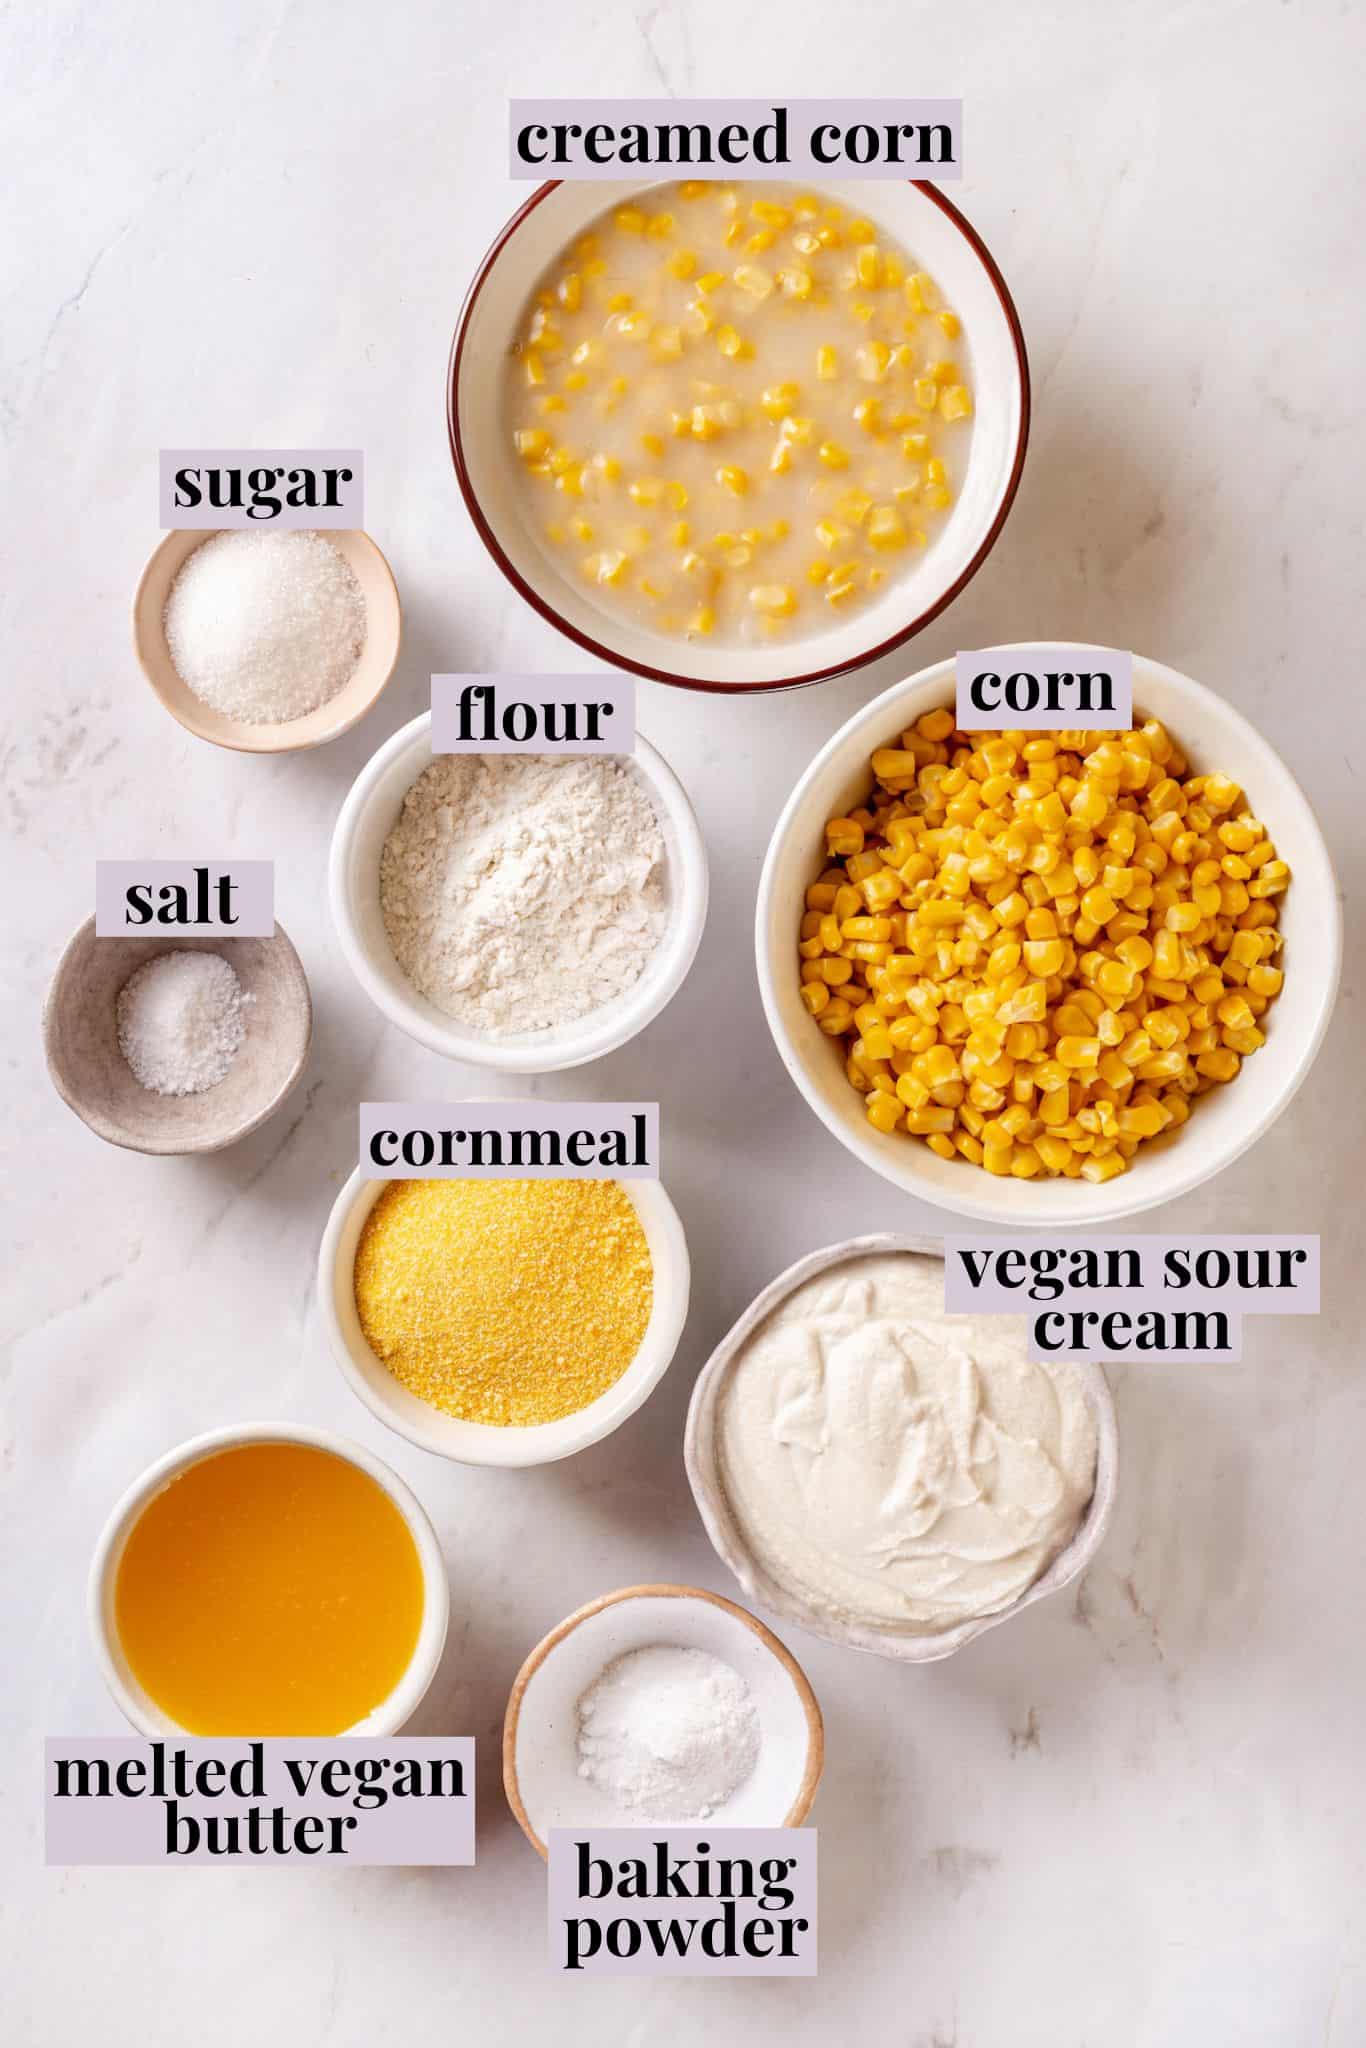 Overhead view of ingredients for corn souffle with labels